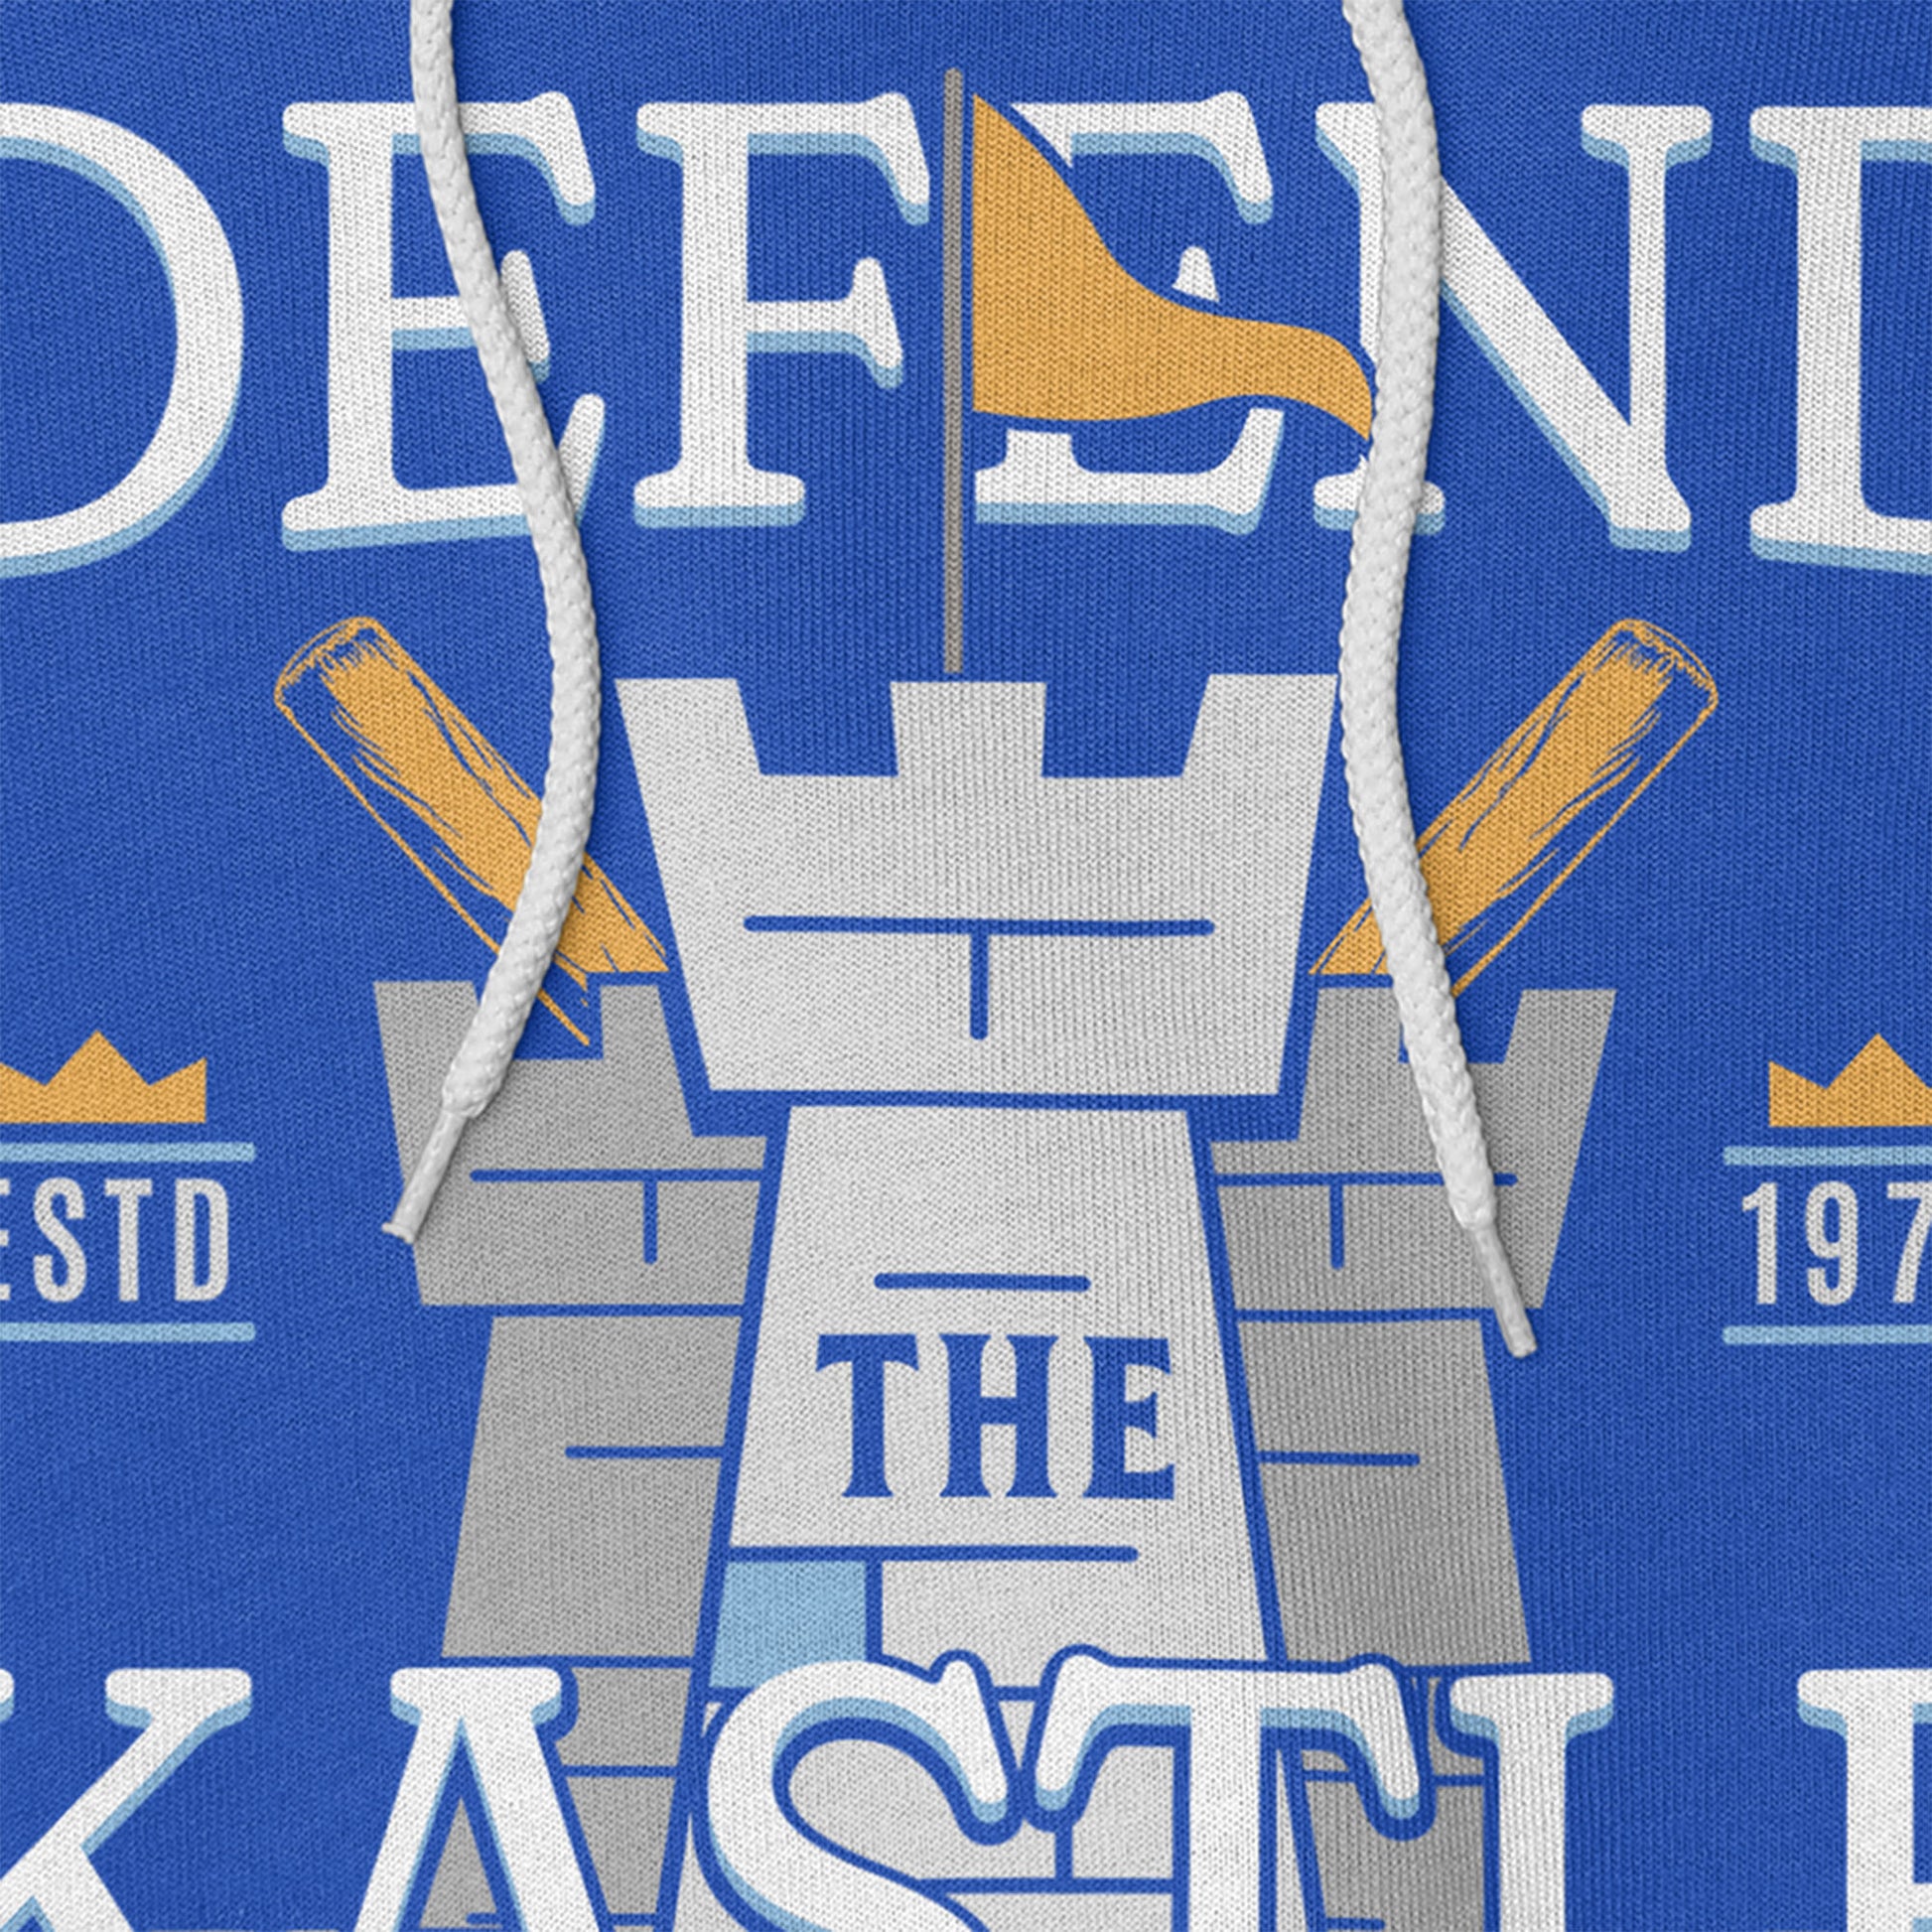 KC Swag Kansas City Royals powder, gold DEFEND THE KASTLE on blue fleece pullover hoodie closeup details of printed graphics